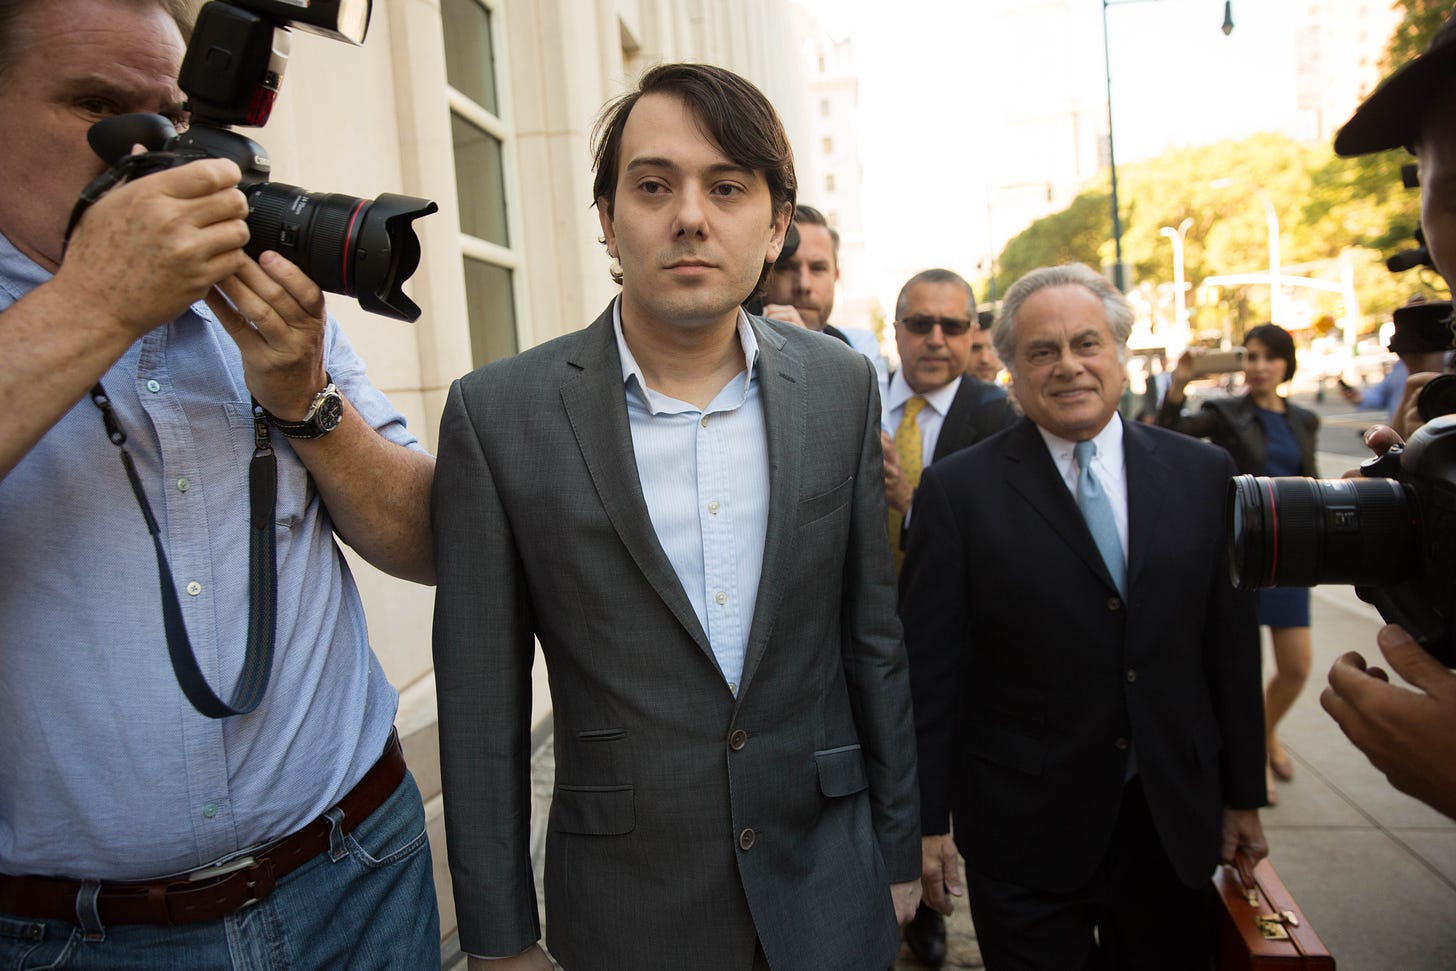 Martin Shkreli walking into the Brooklyn federal courthouse. (Getty Images)